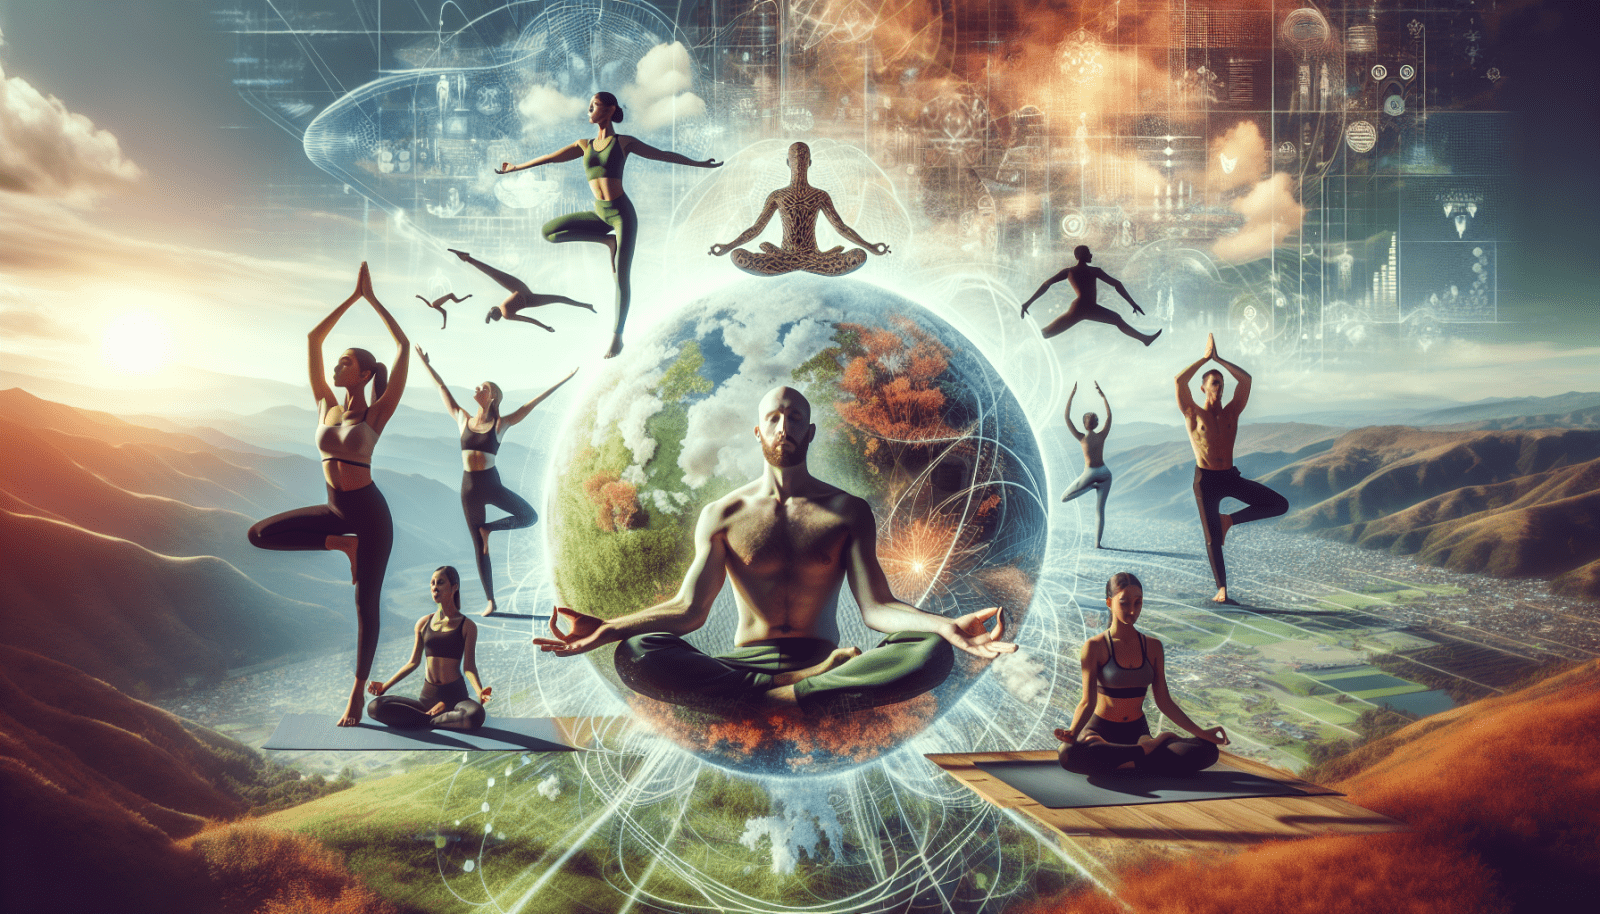 Digital artwork depicting multiple people practicing yoga poses around a large, central figure meditating above the Earth, with a technological and nature fusion background.